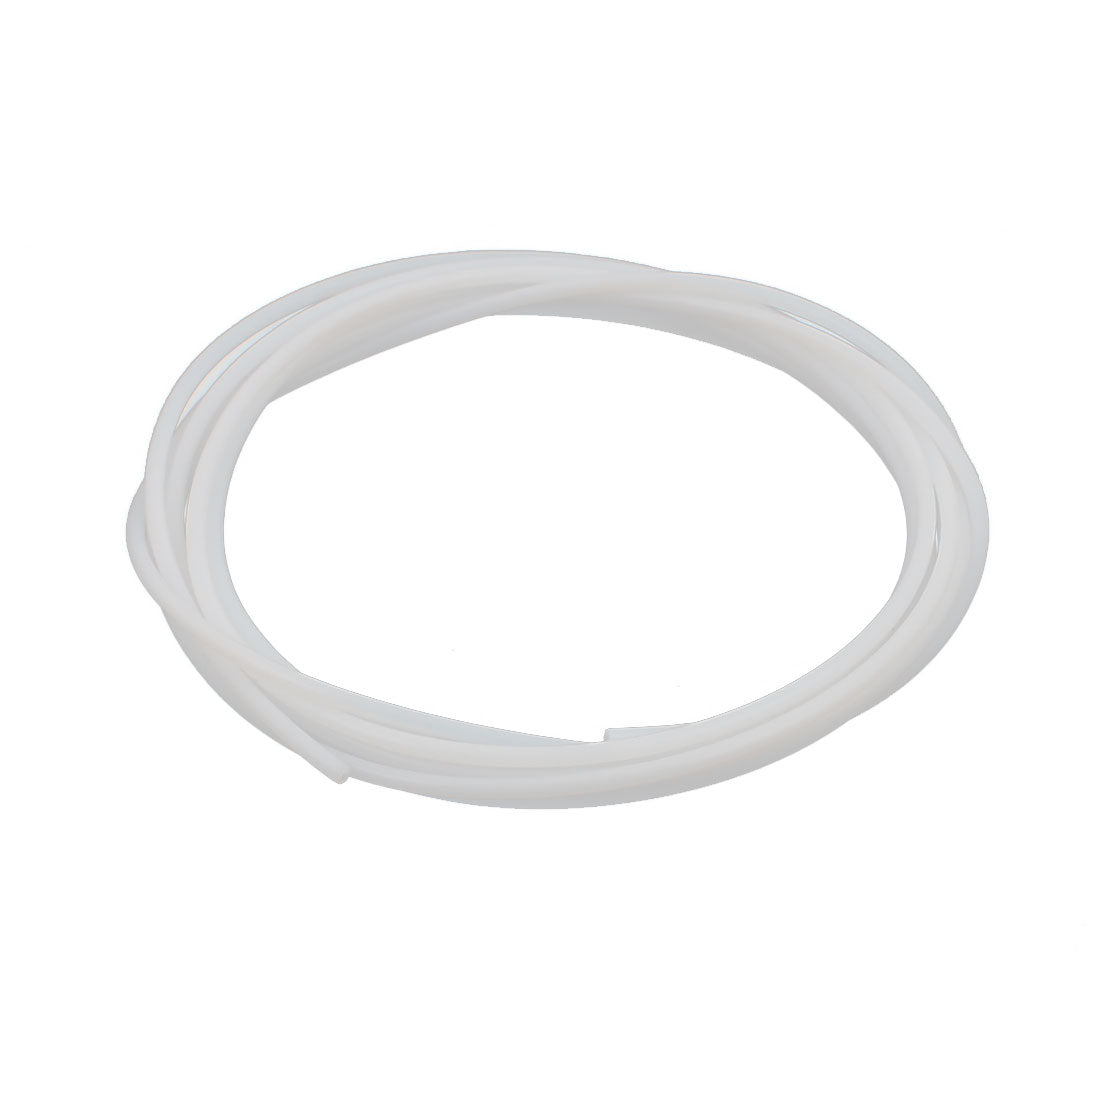 uxcell Uxcell 1.5mm x 1.9mm PTFE Tubing Tube Pipe 2 Meters 6.6ft for 3D Printer RepRap